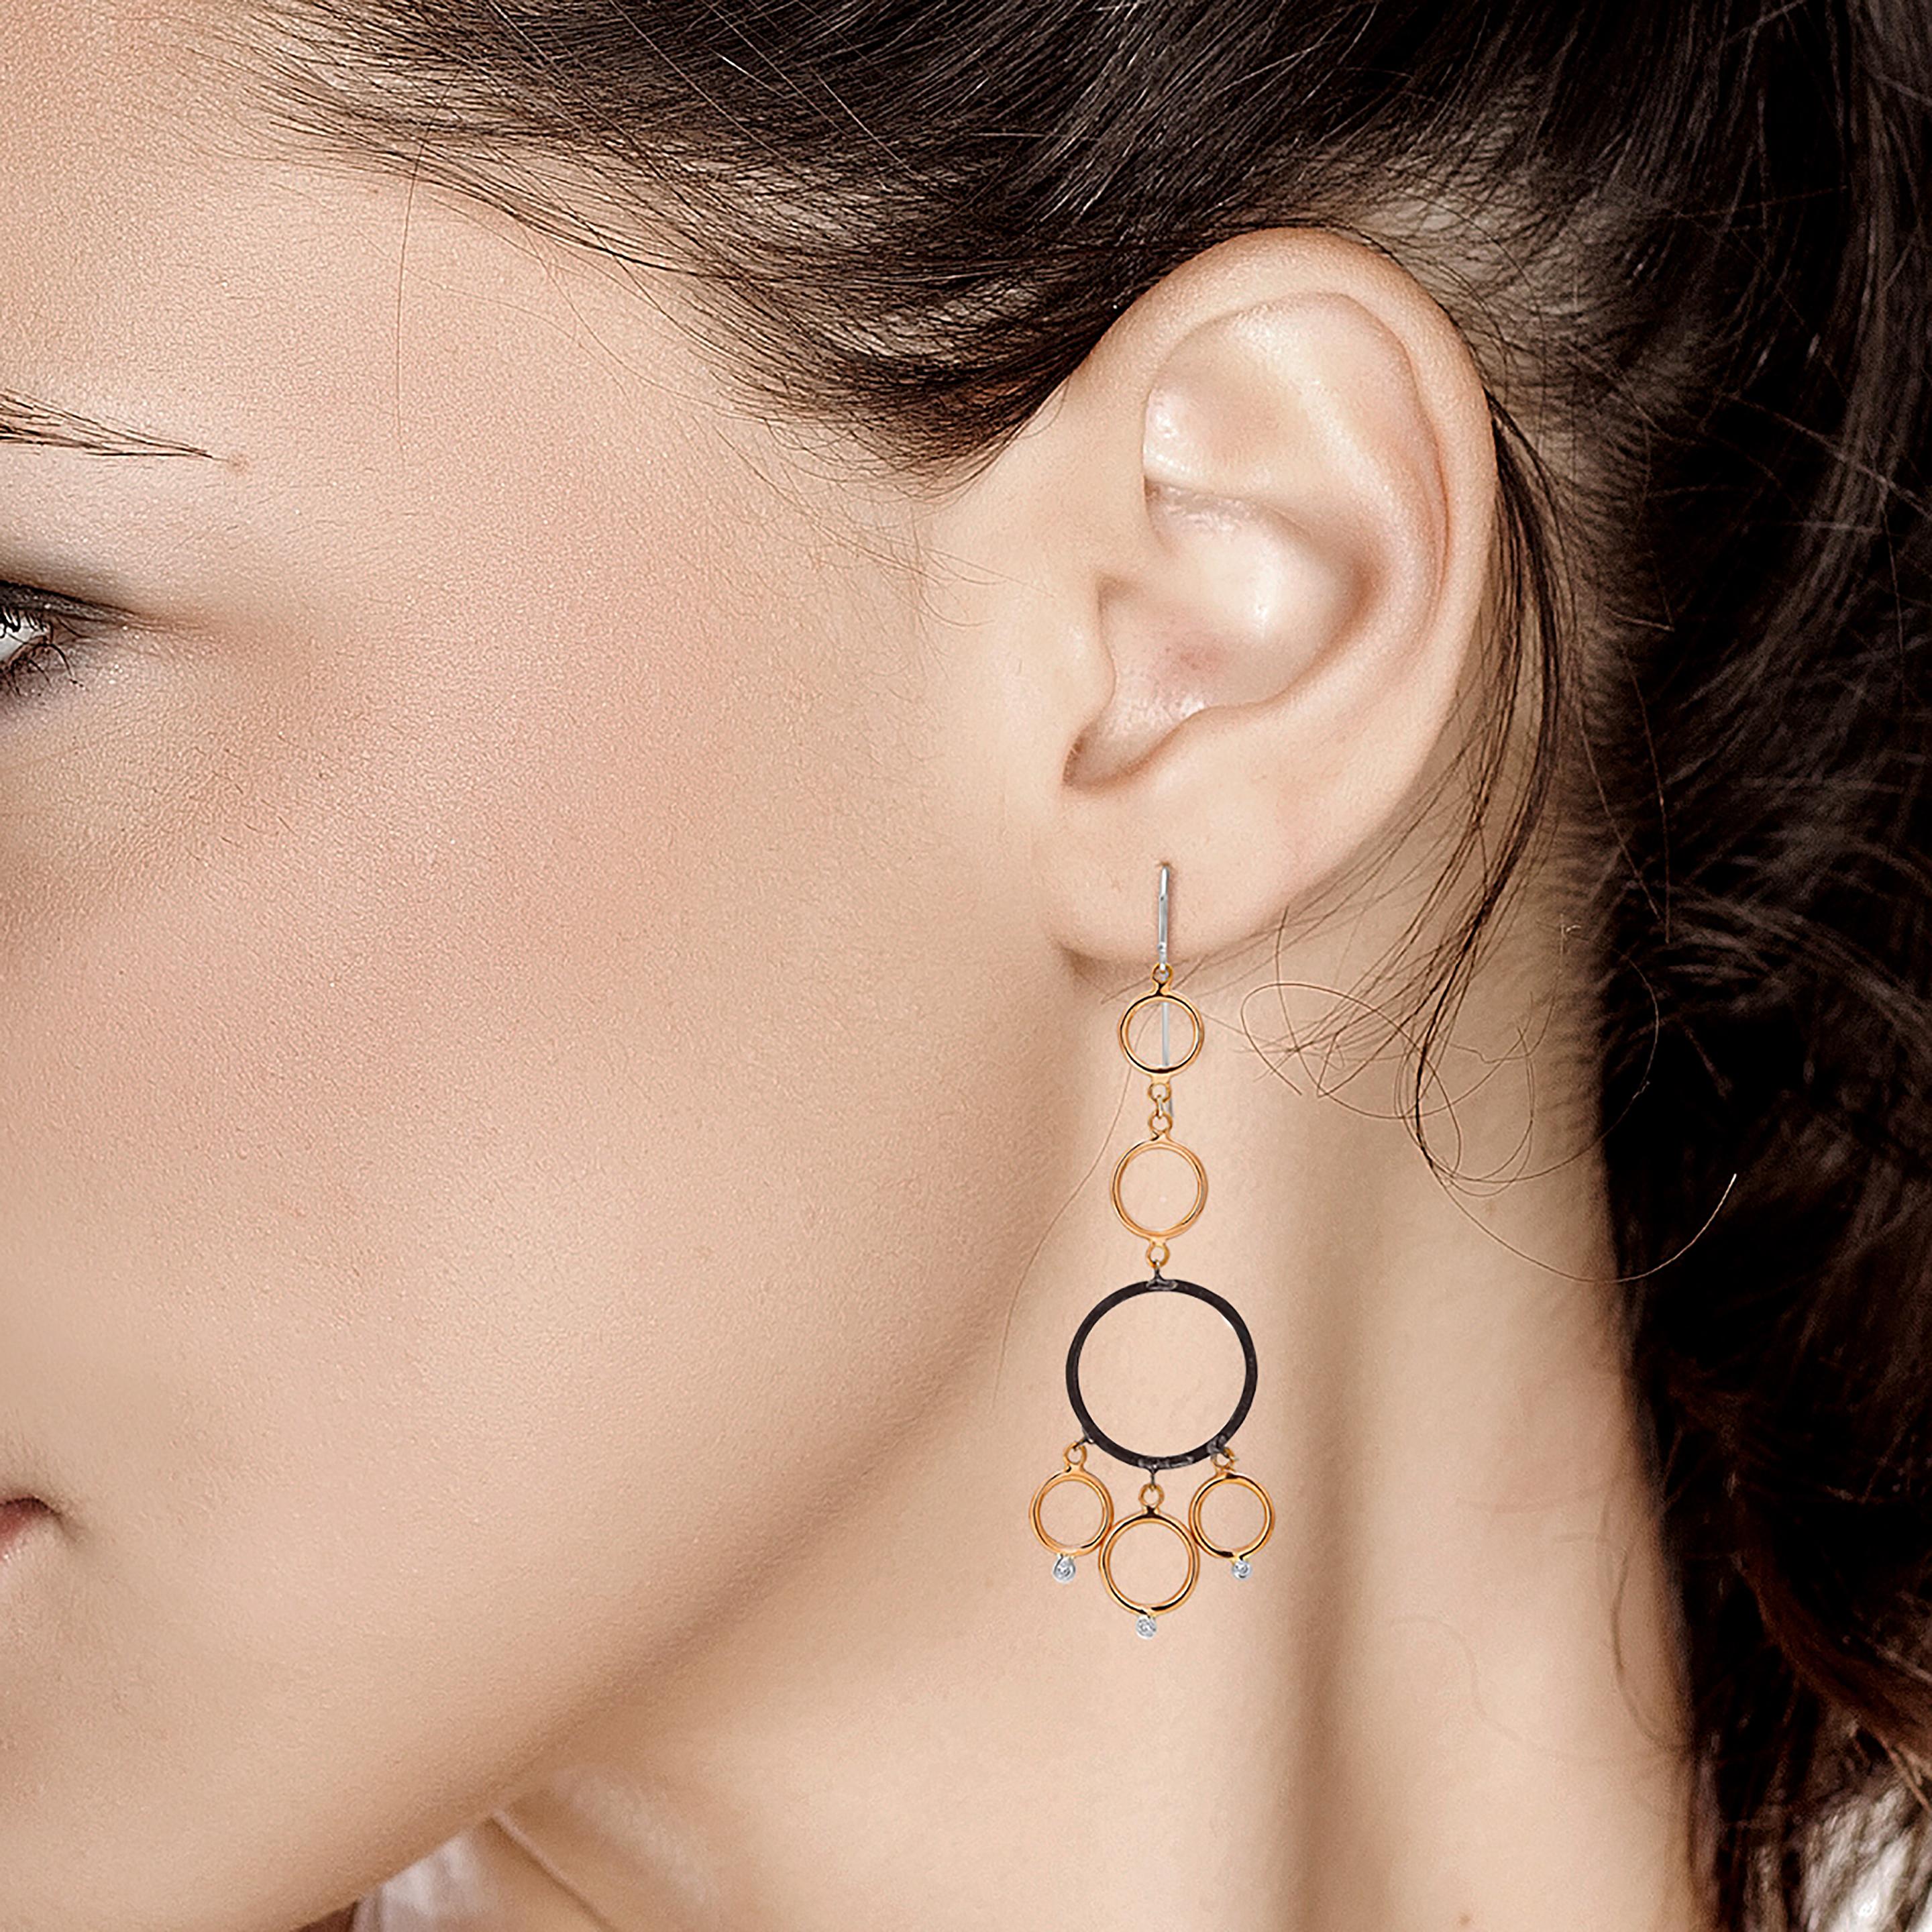 Round Cut Rose and White Gold Hoop Diamond Earrings with Blacken Silver Circles